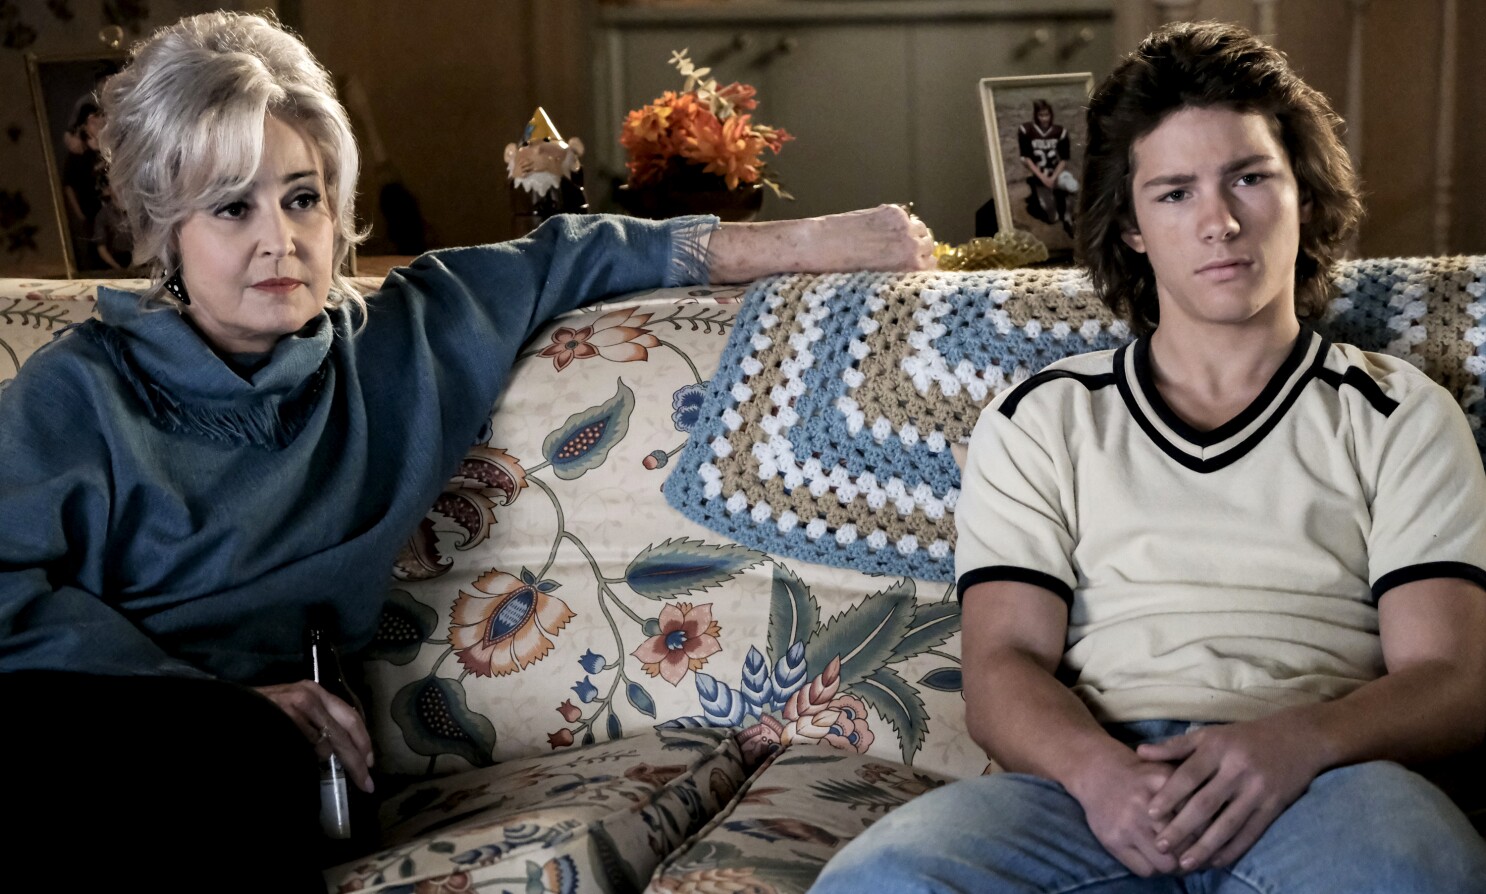 In Young Sheldon Who Is Ryan Davis? Model of Attribution